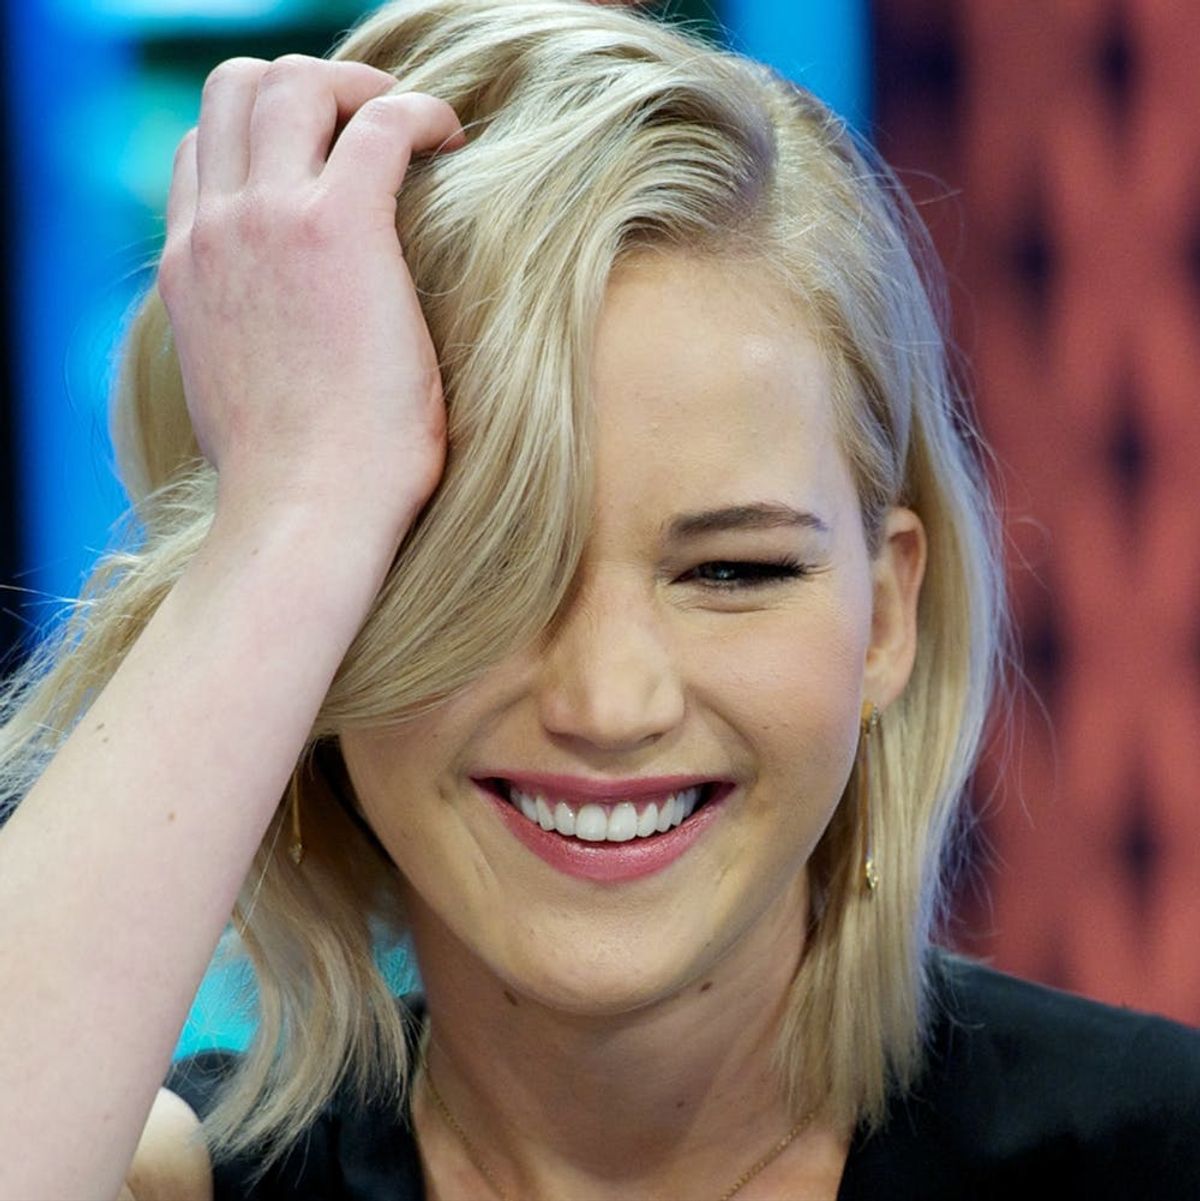 The One Thing You Should Know Before Asking Someone Out, According to Jennifer Lawrence